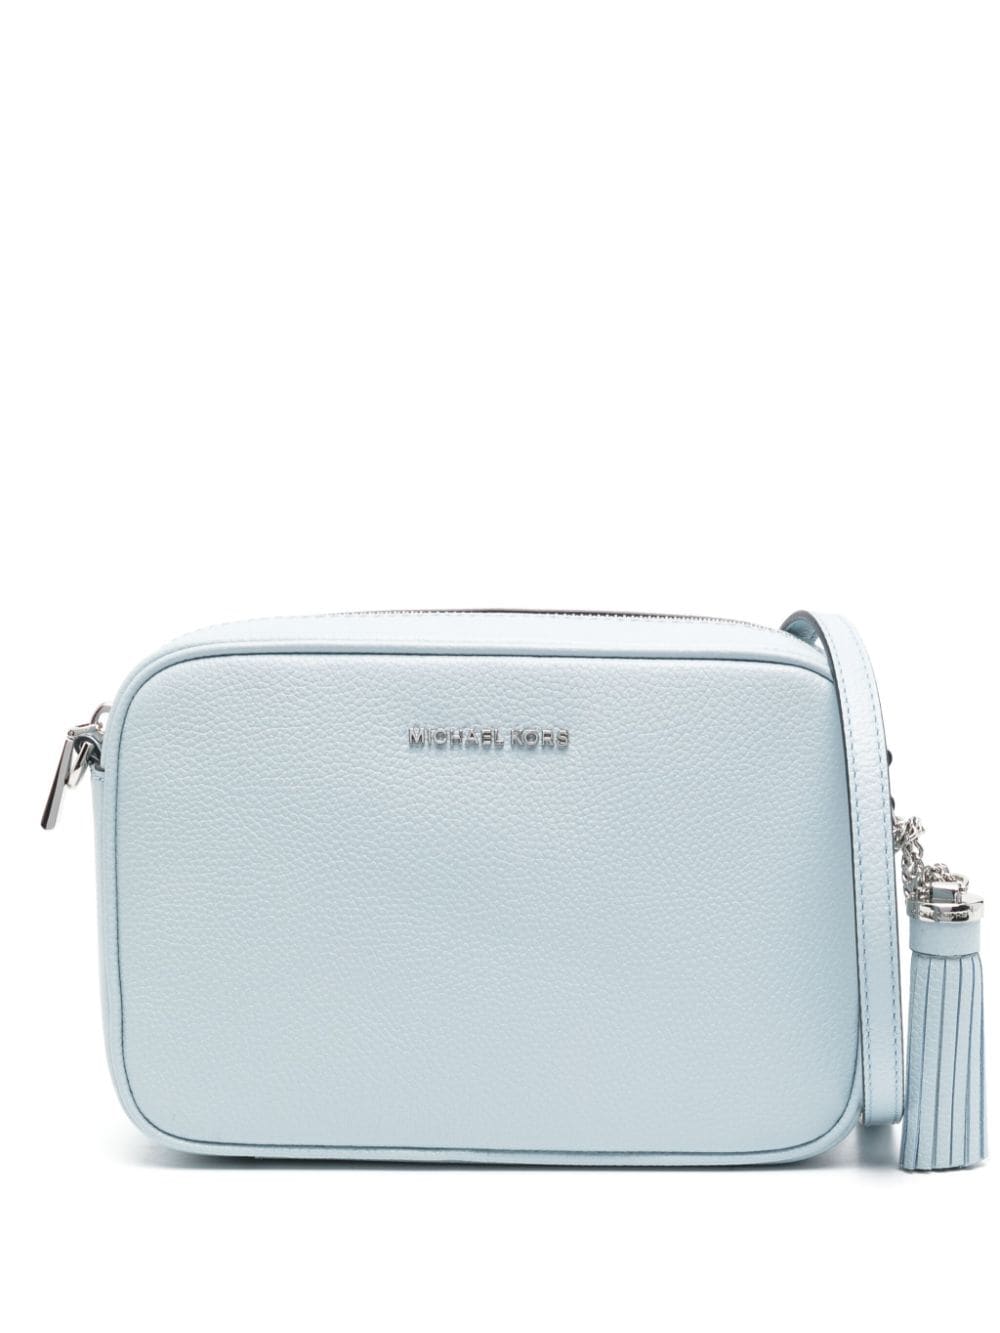 Michael Kors Ginny Leather Cross Body Bag In Blue